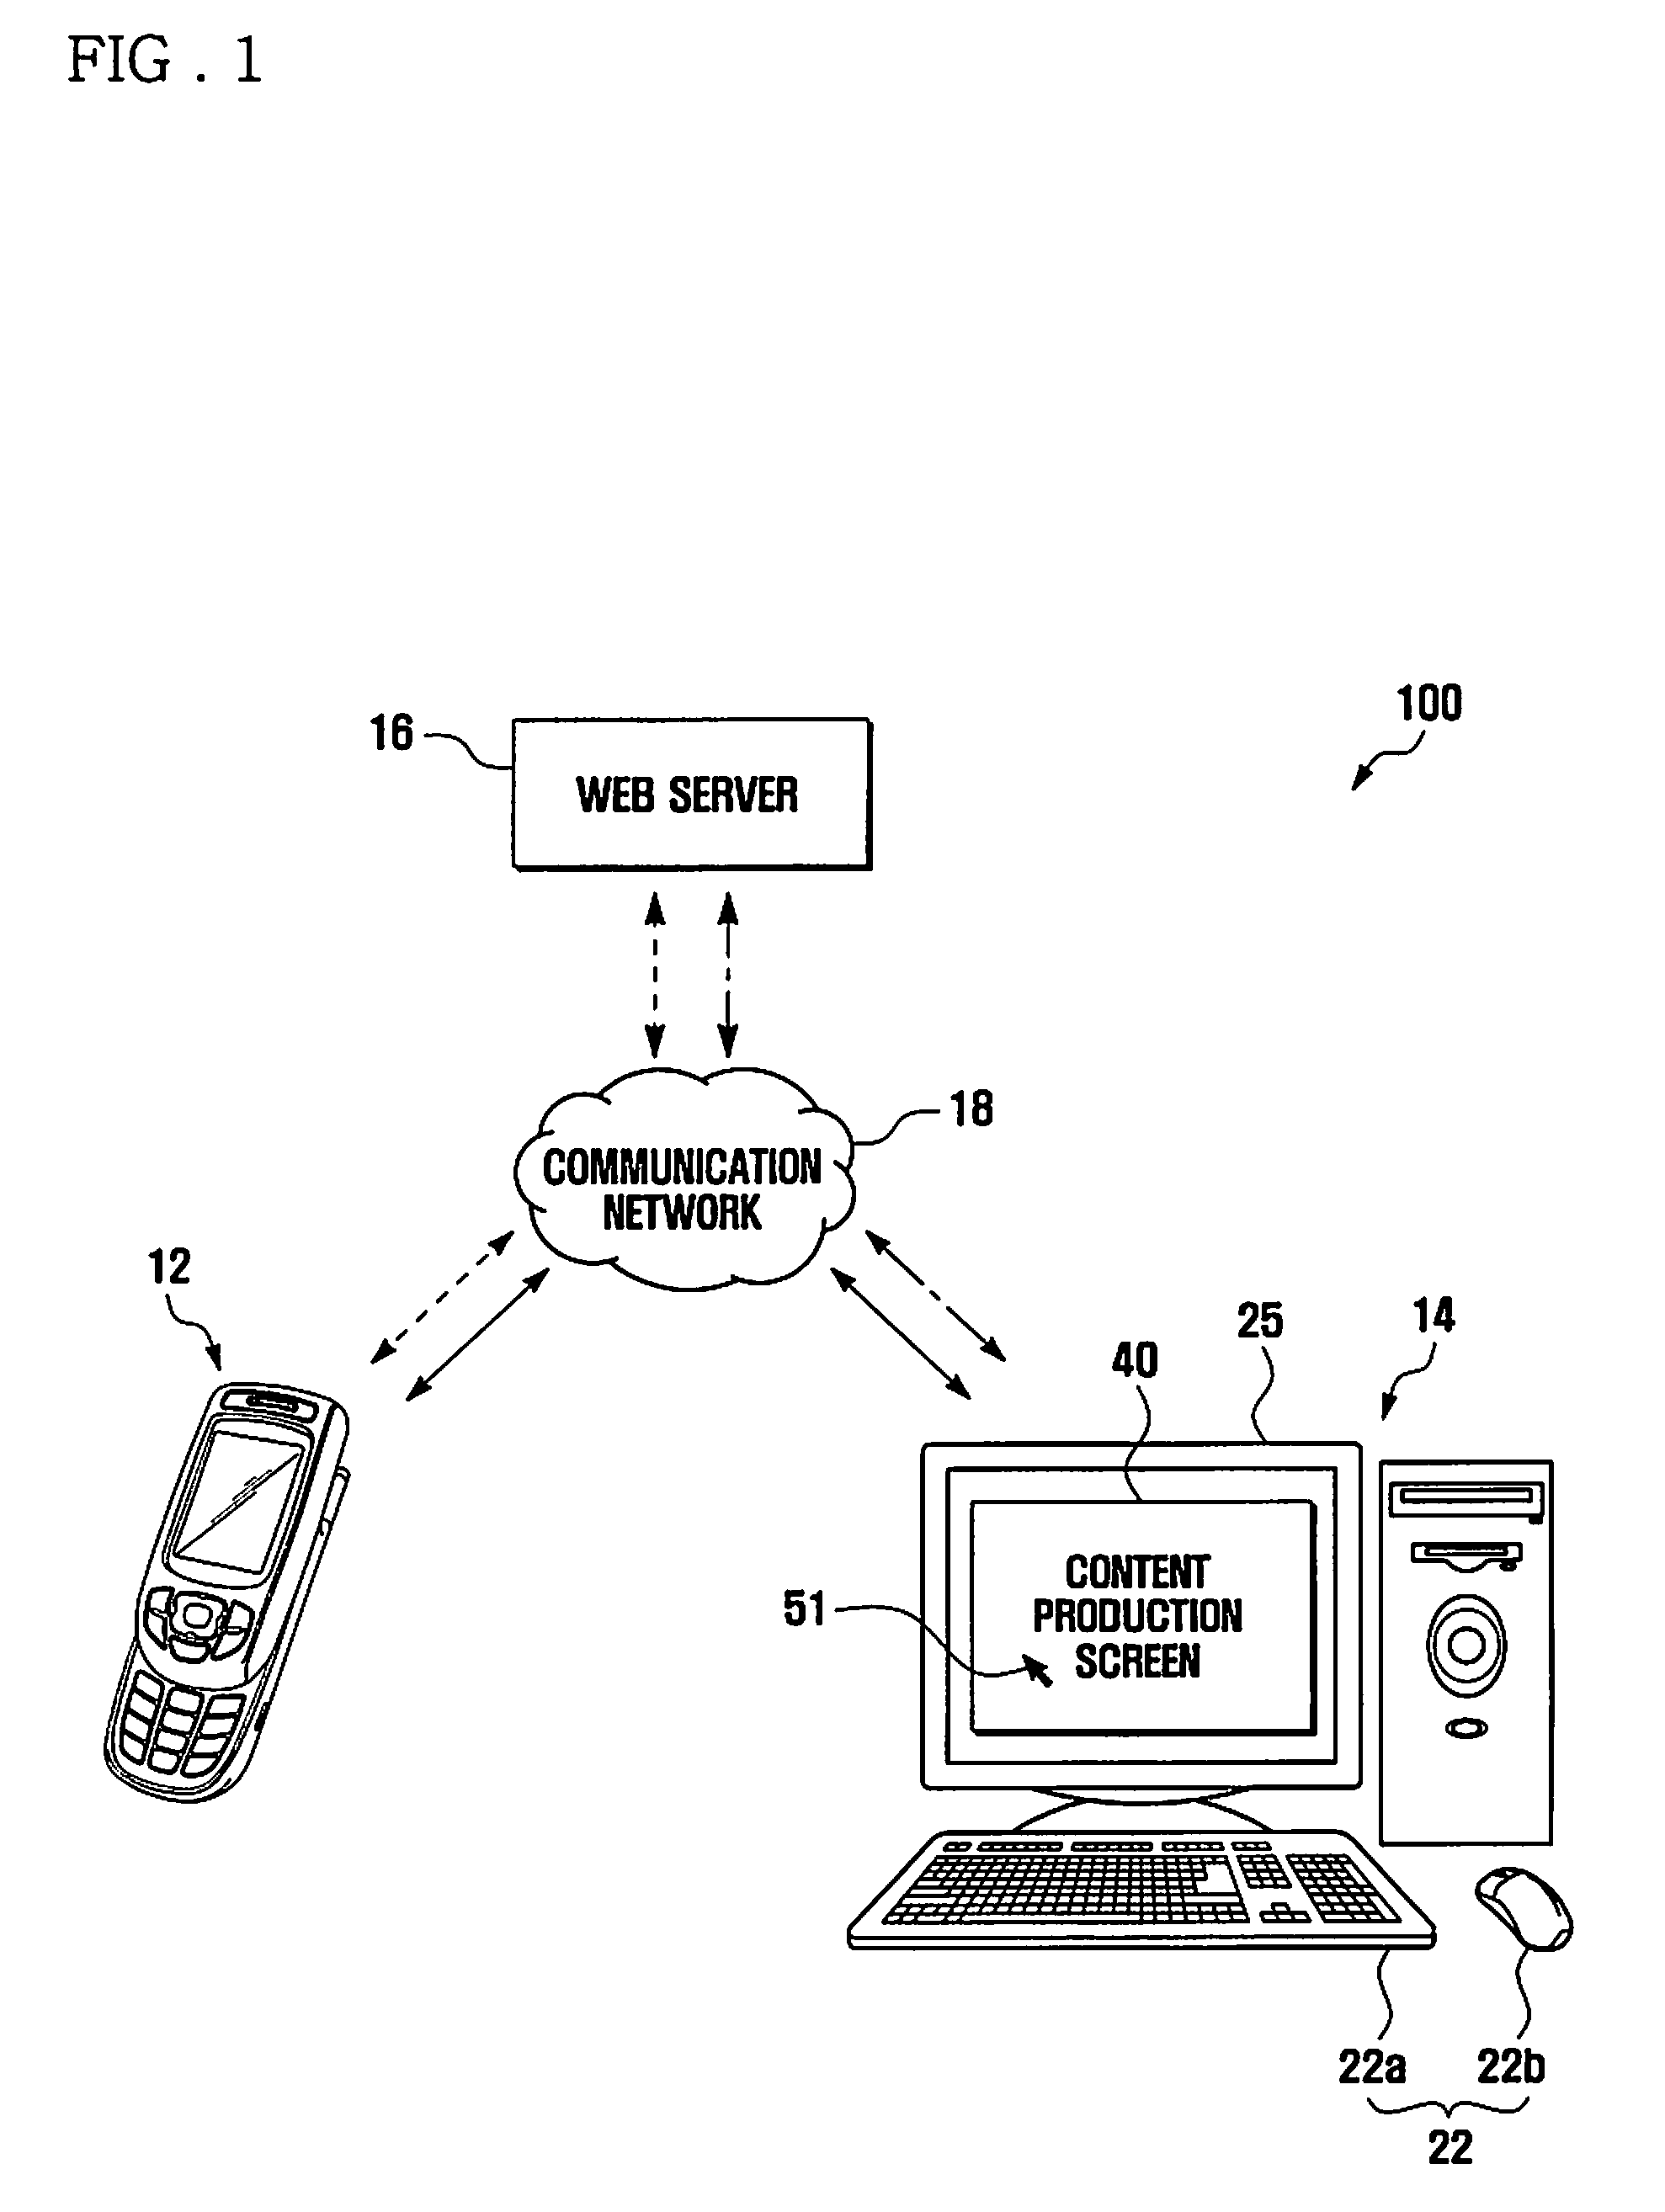 Content production apparatus and method